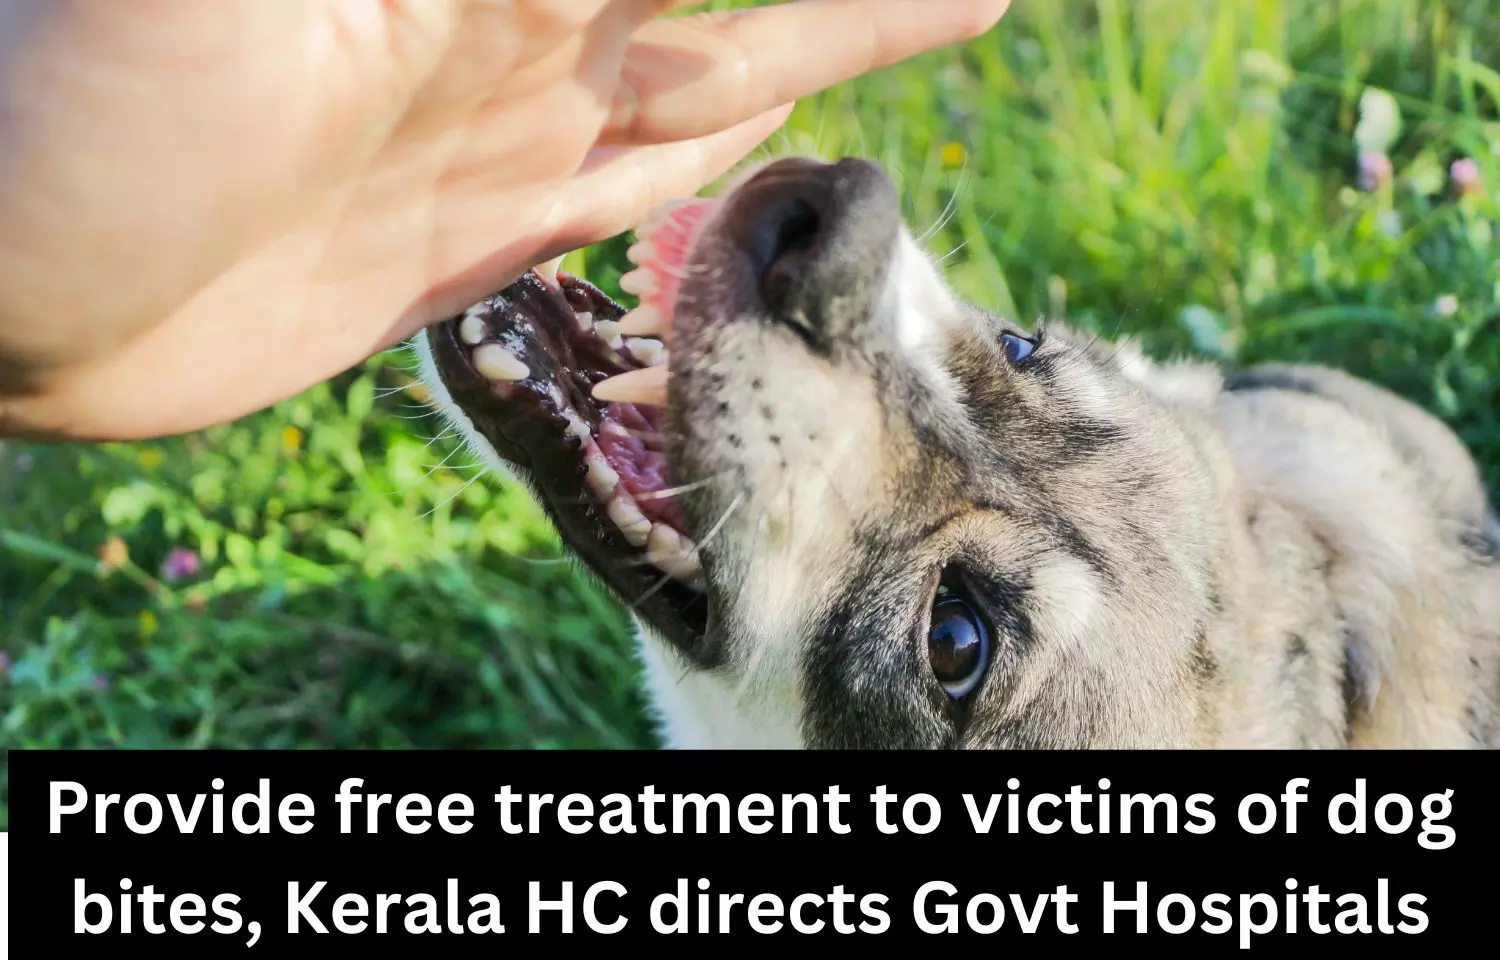 Kerala HC directs Govt Hospitals to provide free treatment to victims of dog bites